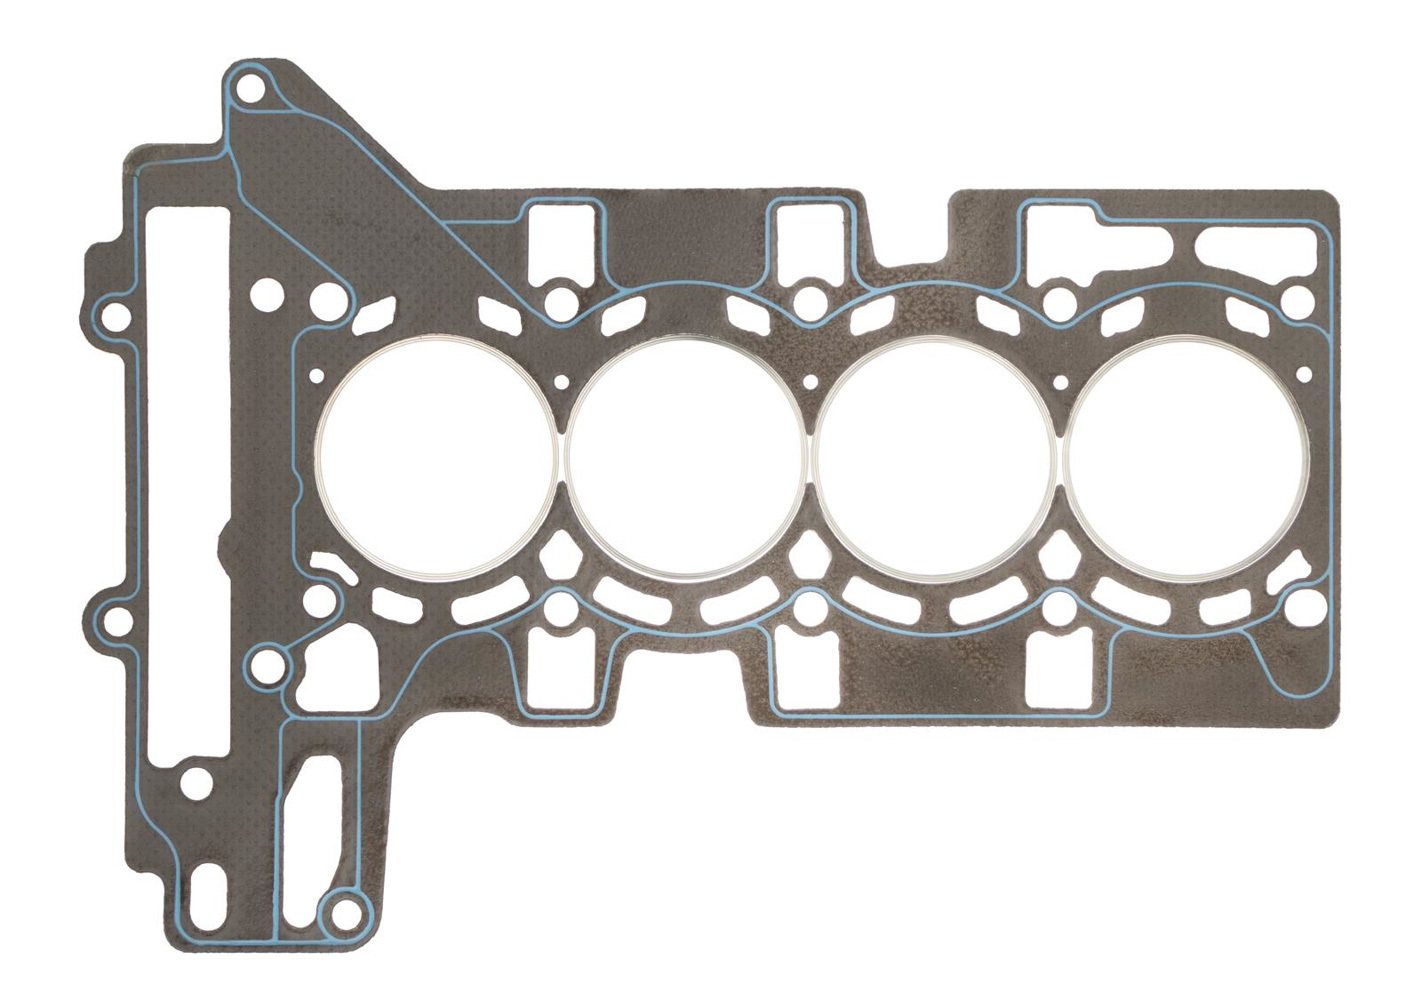 SCE Gaskets CR330070 - Cylinder Head Gasket, Vulcan Cut Ring, 85.00 mm Bore, 1.20 mm Compression Thickness, Steel Core Laminate, BMW 4-Cylinder, Each